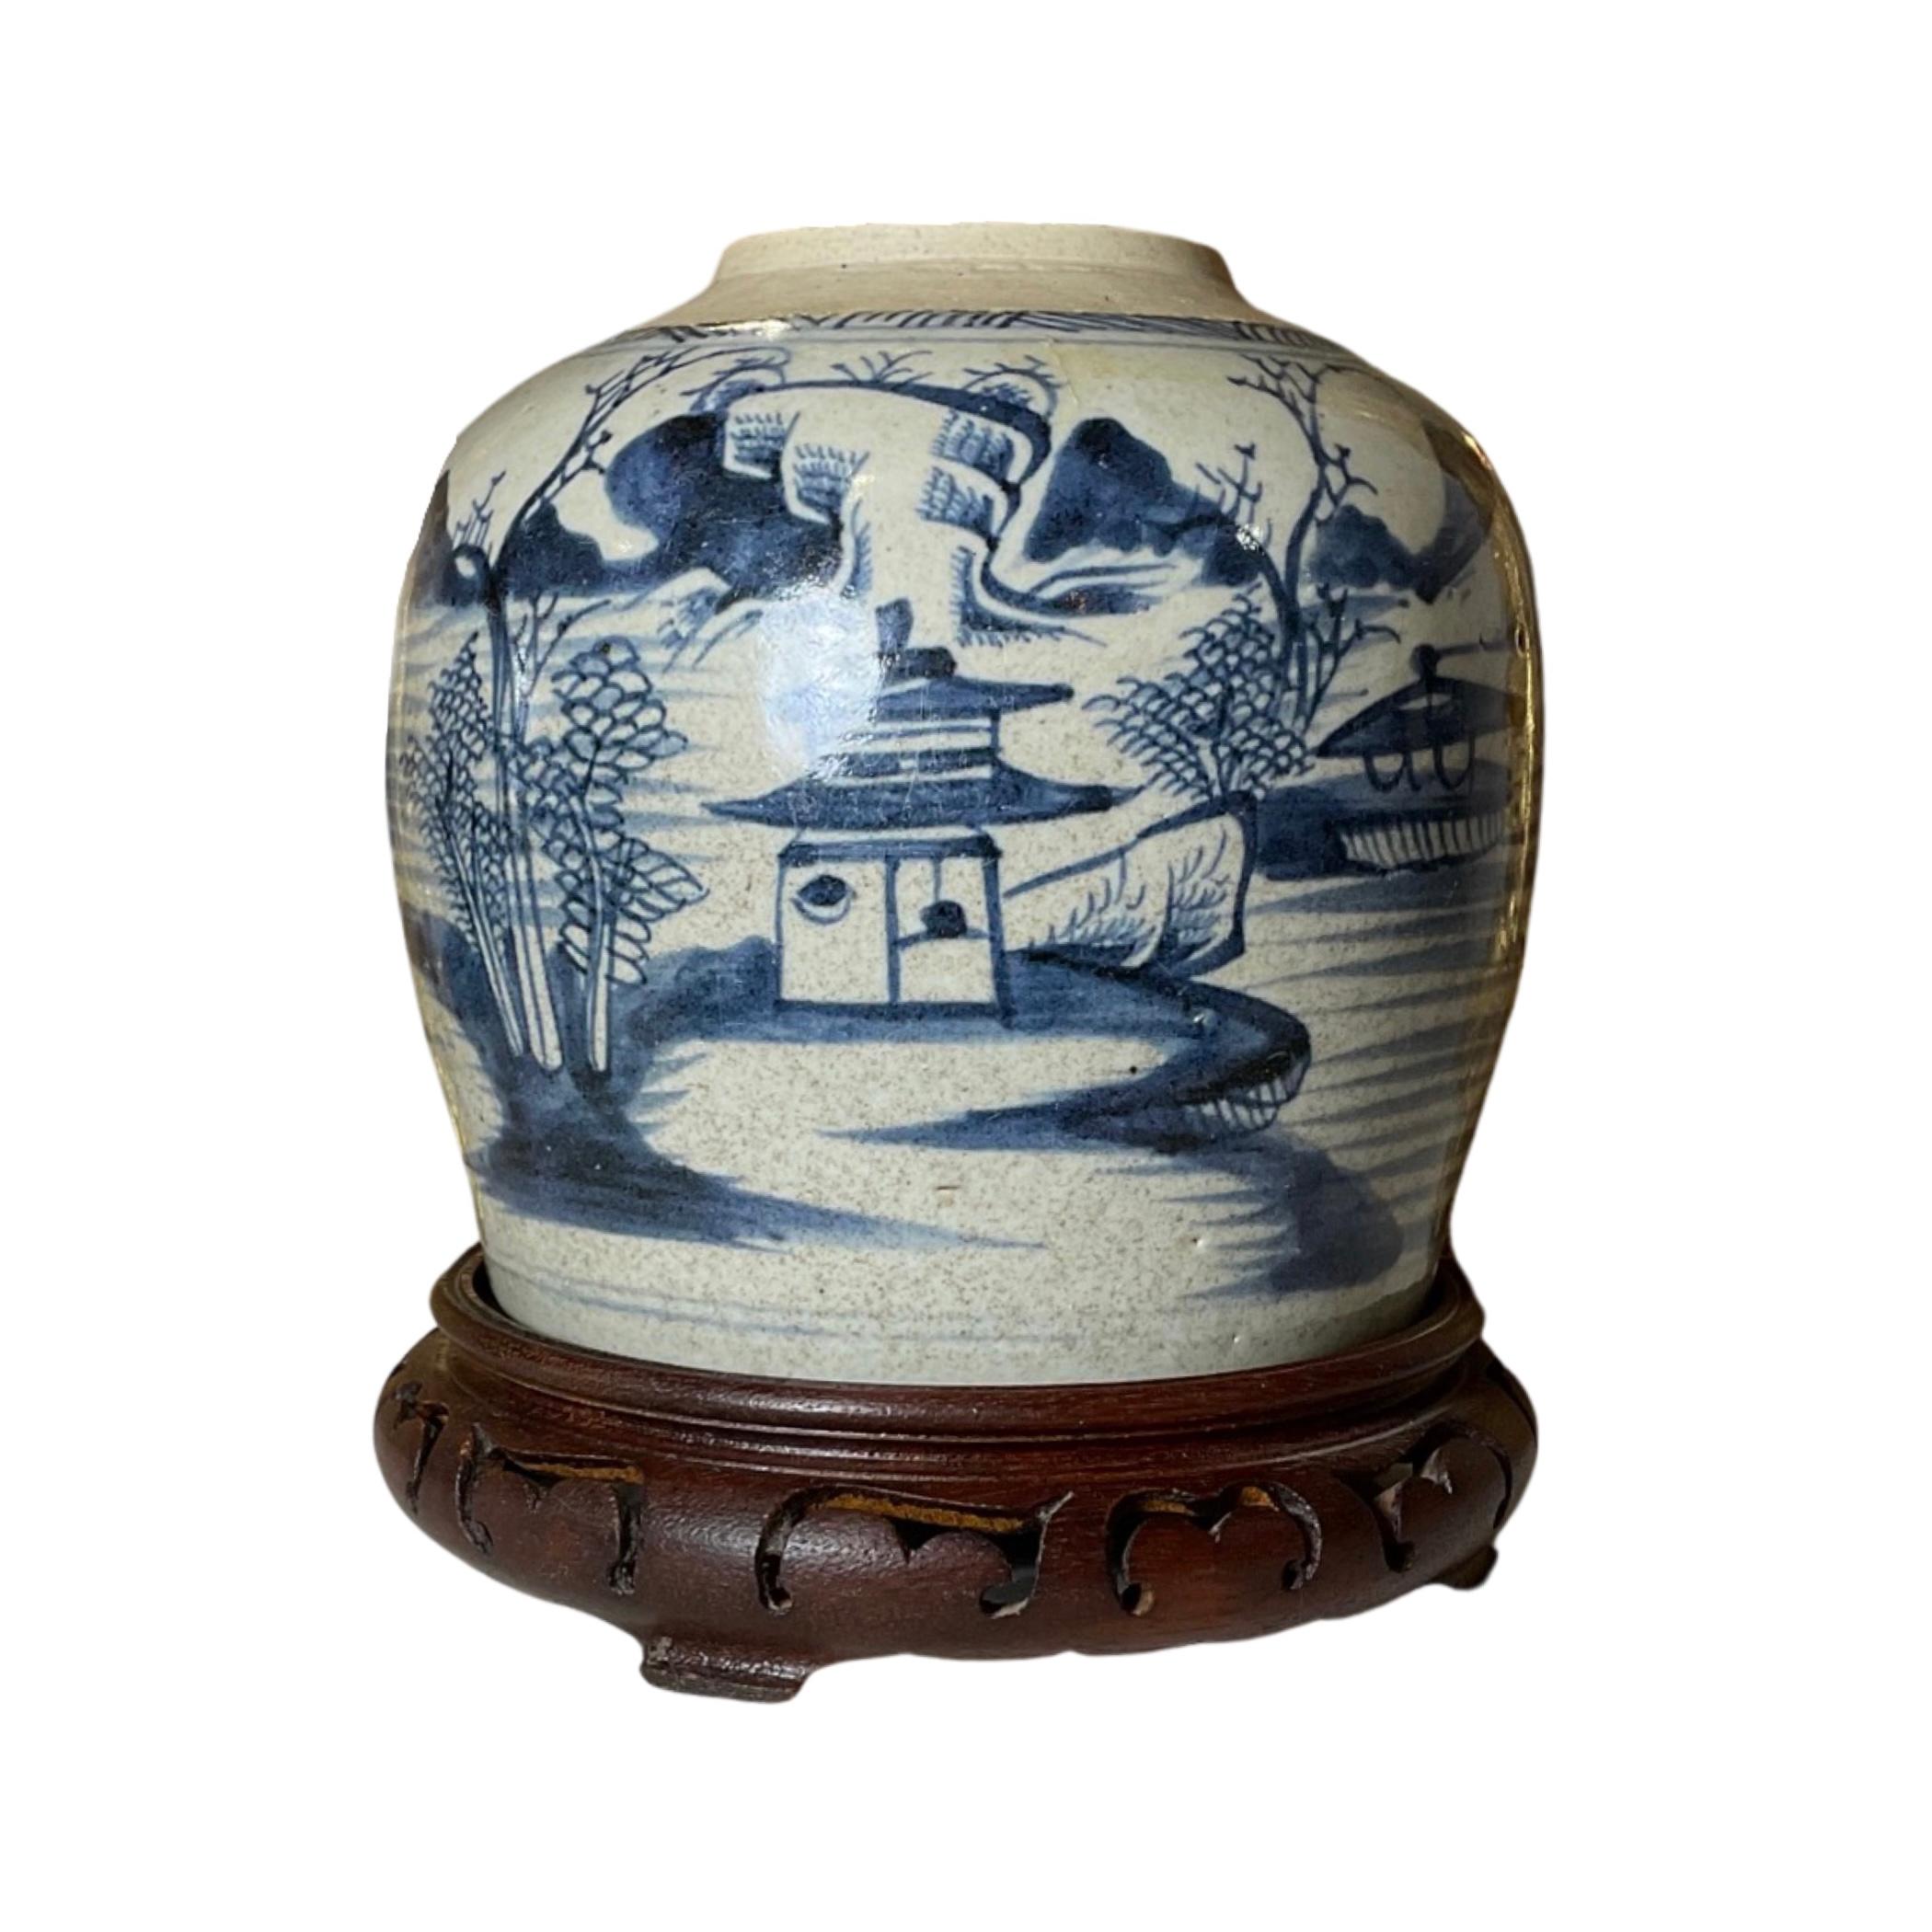 This exquisite 18th-century Chinese porcelain storage jar is beautifully crafted and comes complete with a wooden cap and stand. Perfect for storing a variety of items, it's an elegant and practical addition to any home.